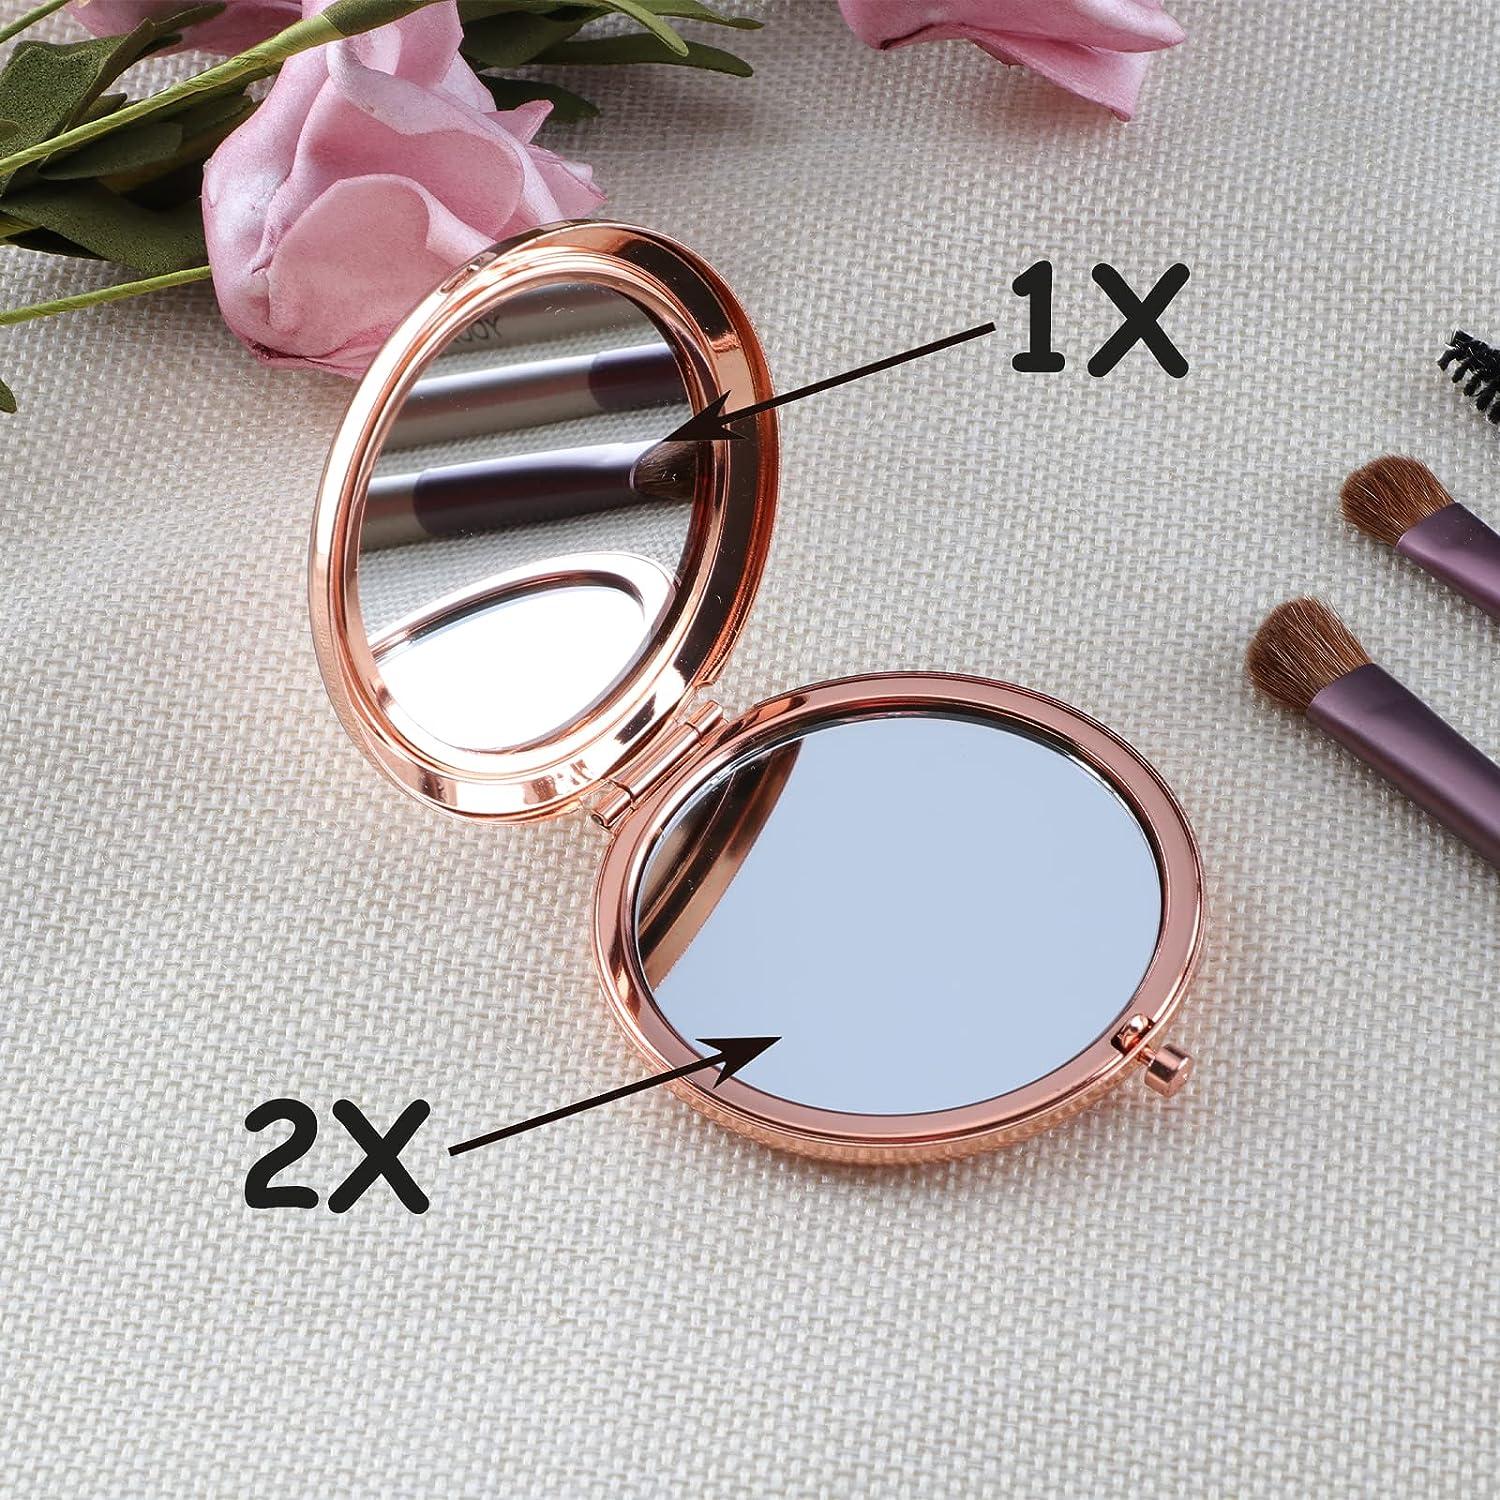 16 Year Old Girl Birthday Gift Rose Gold Compact Makeup Mirror